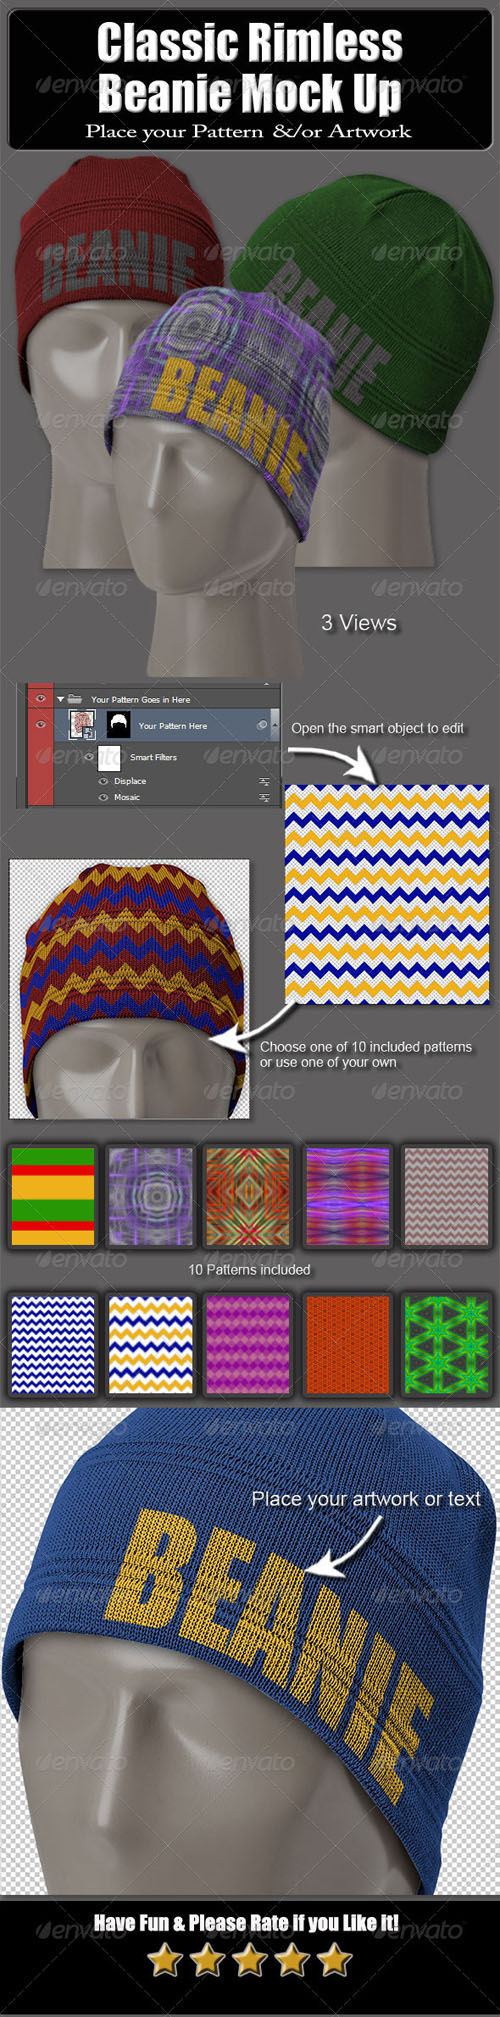 Graphicriver - Classic Rimless Beanie Mock Up - id 6290195